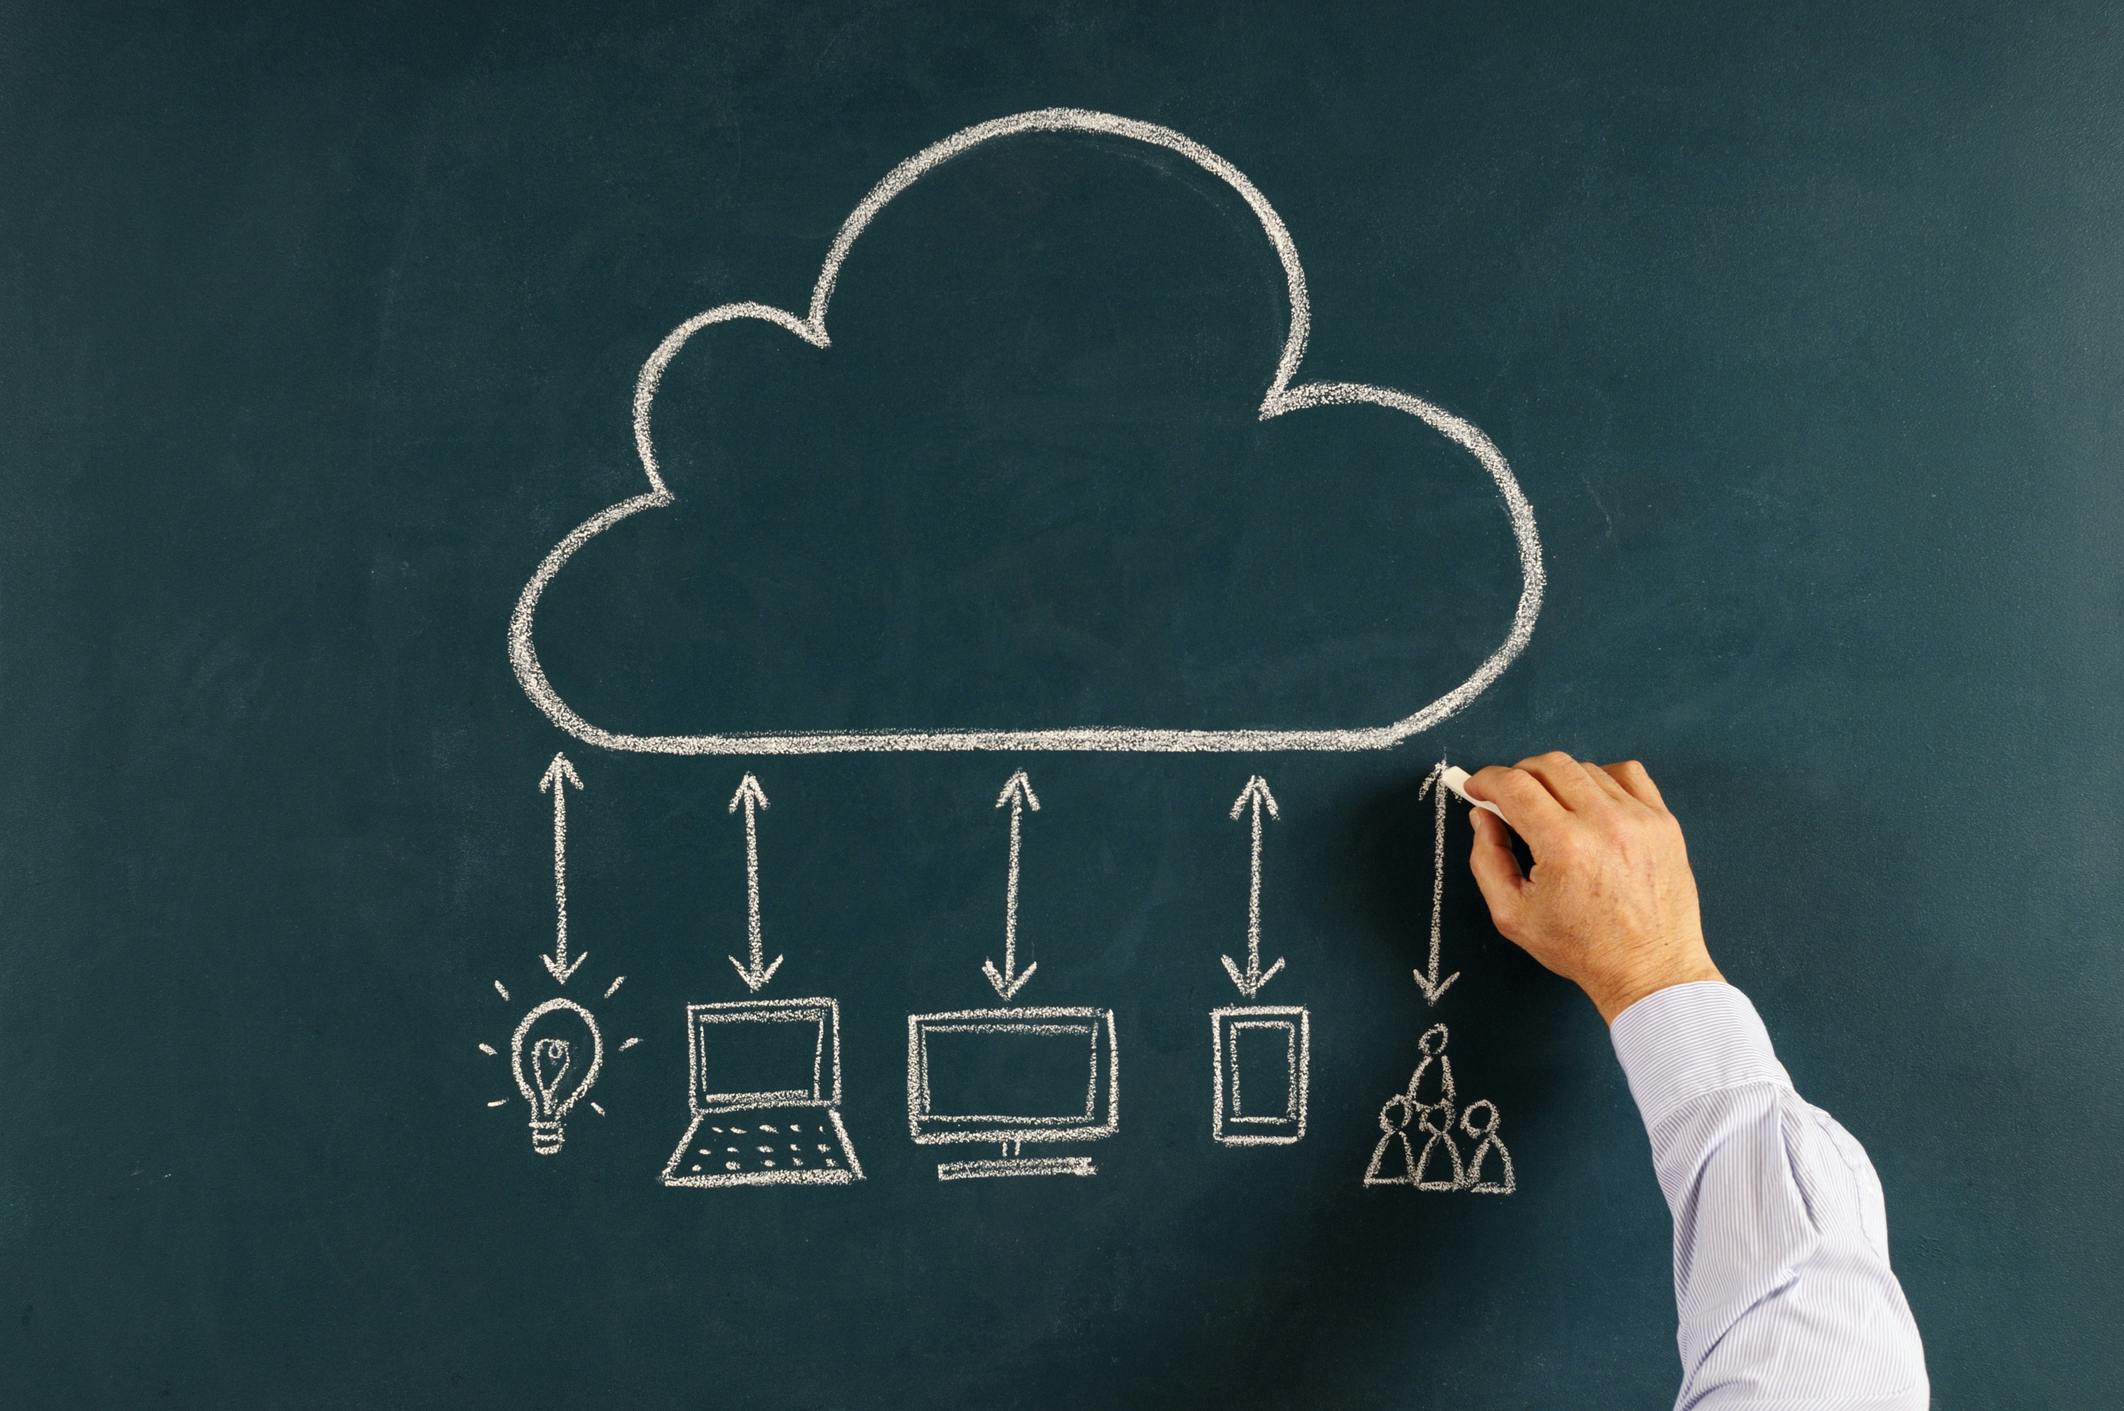 Cloud and Clear: Making Sense of the Higher Education Cloud